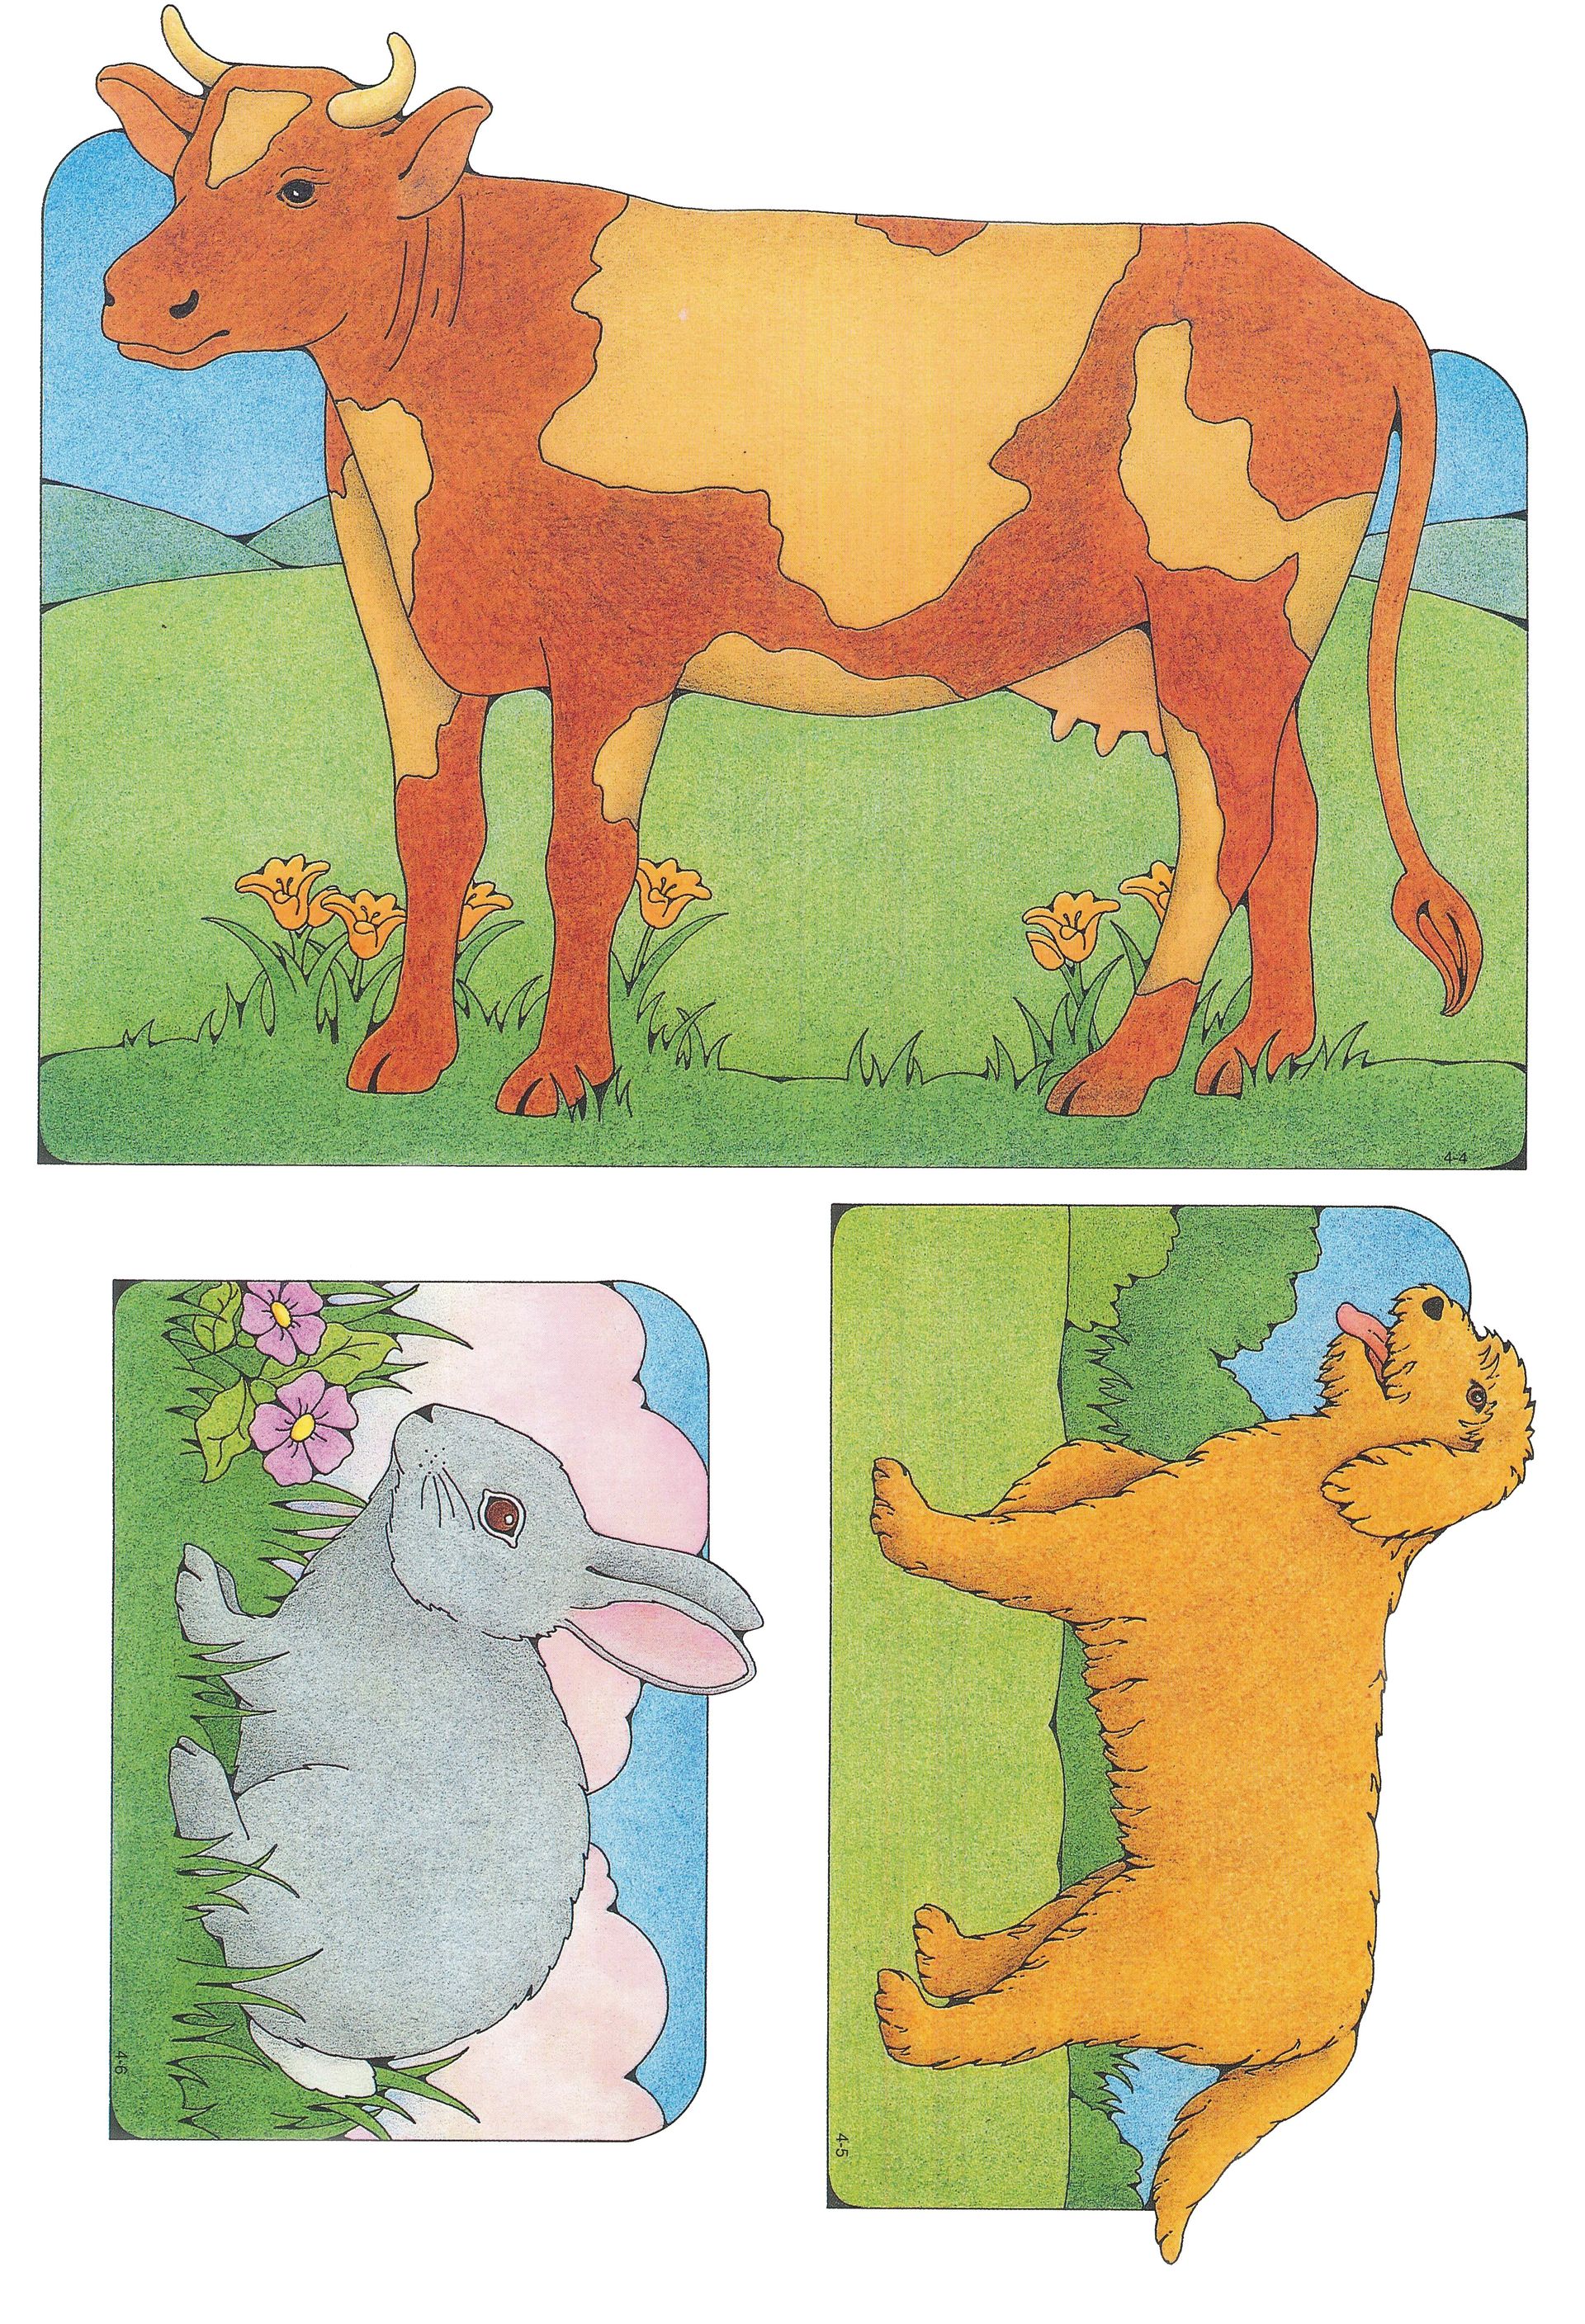 Primary Visual Aids: Cutouts 4-4, Cow; 4-5, Dog; 4-6, Rabbit.